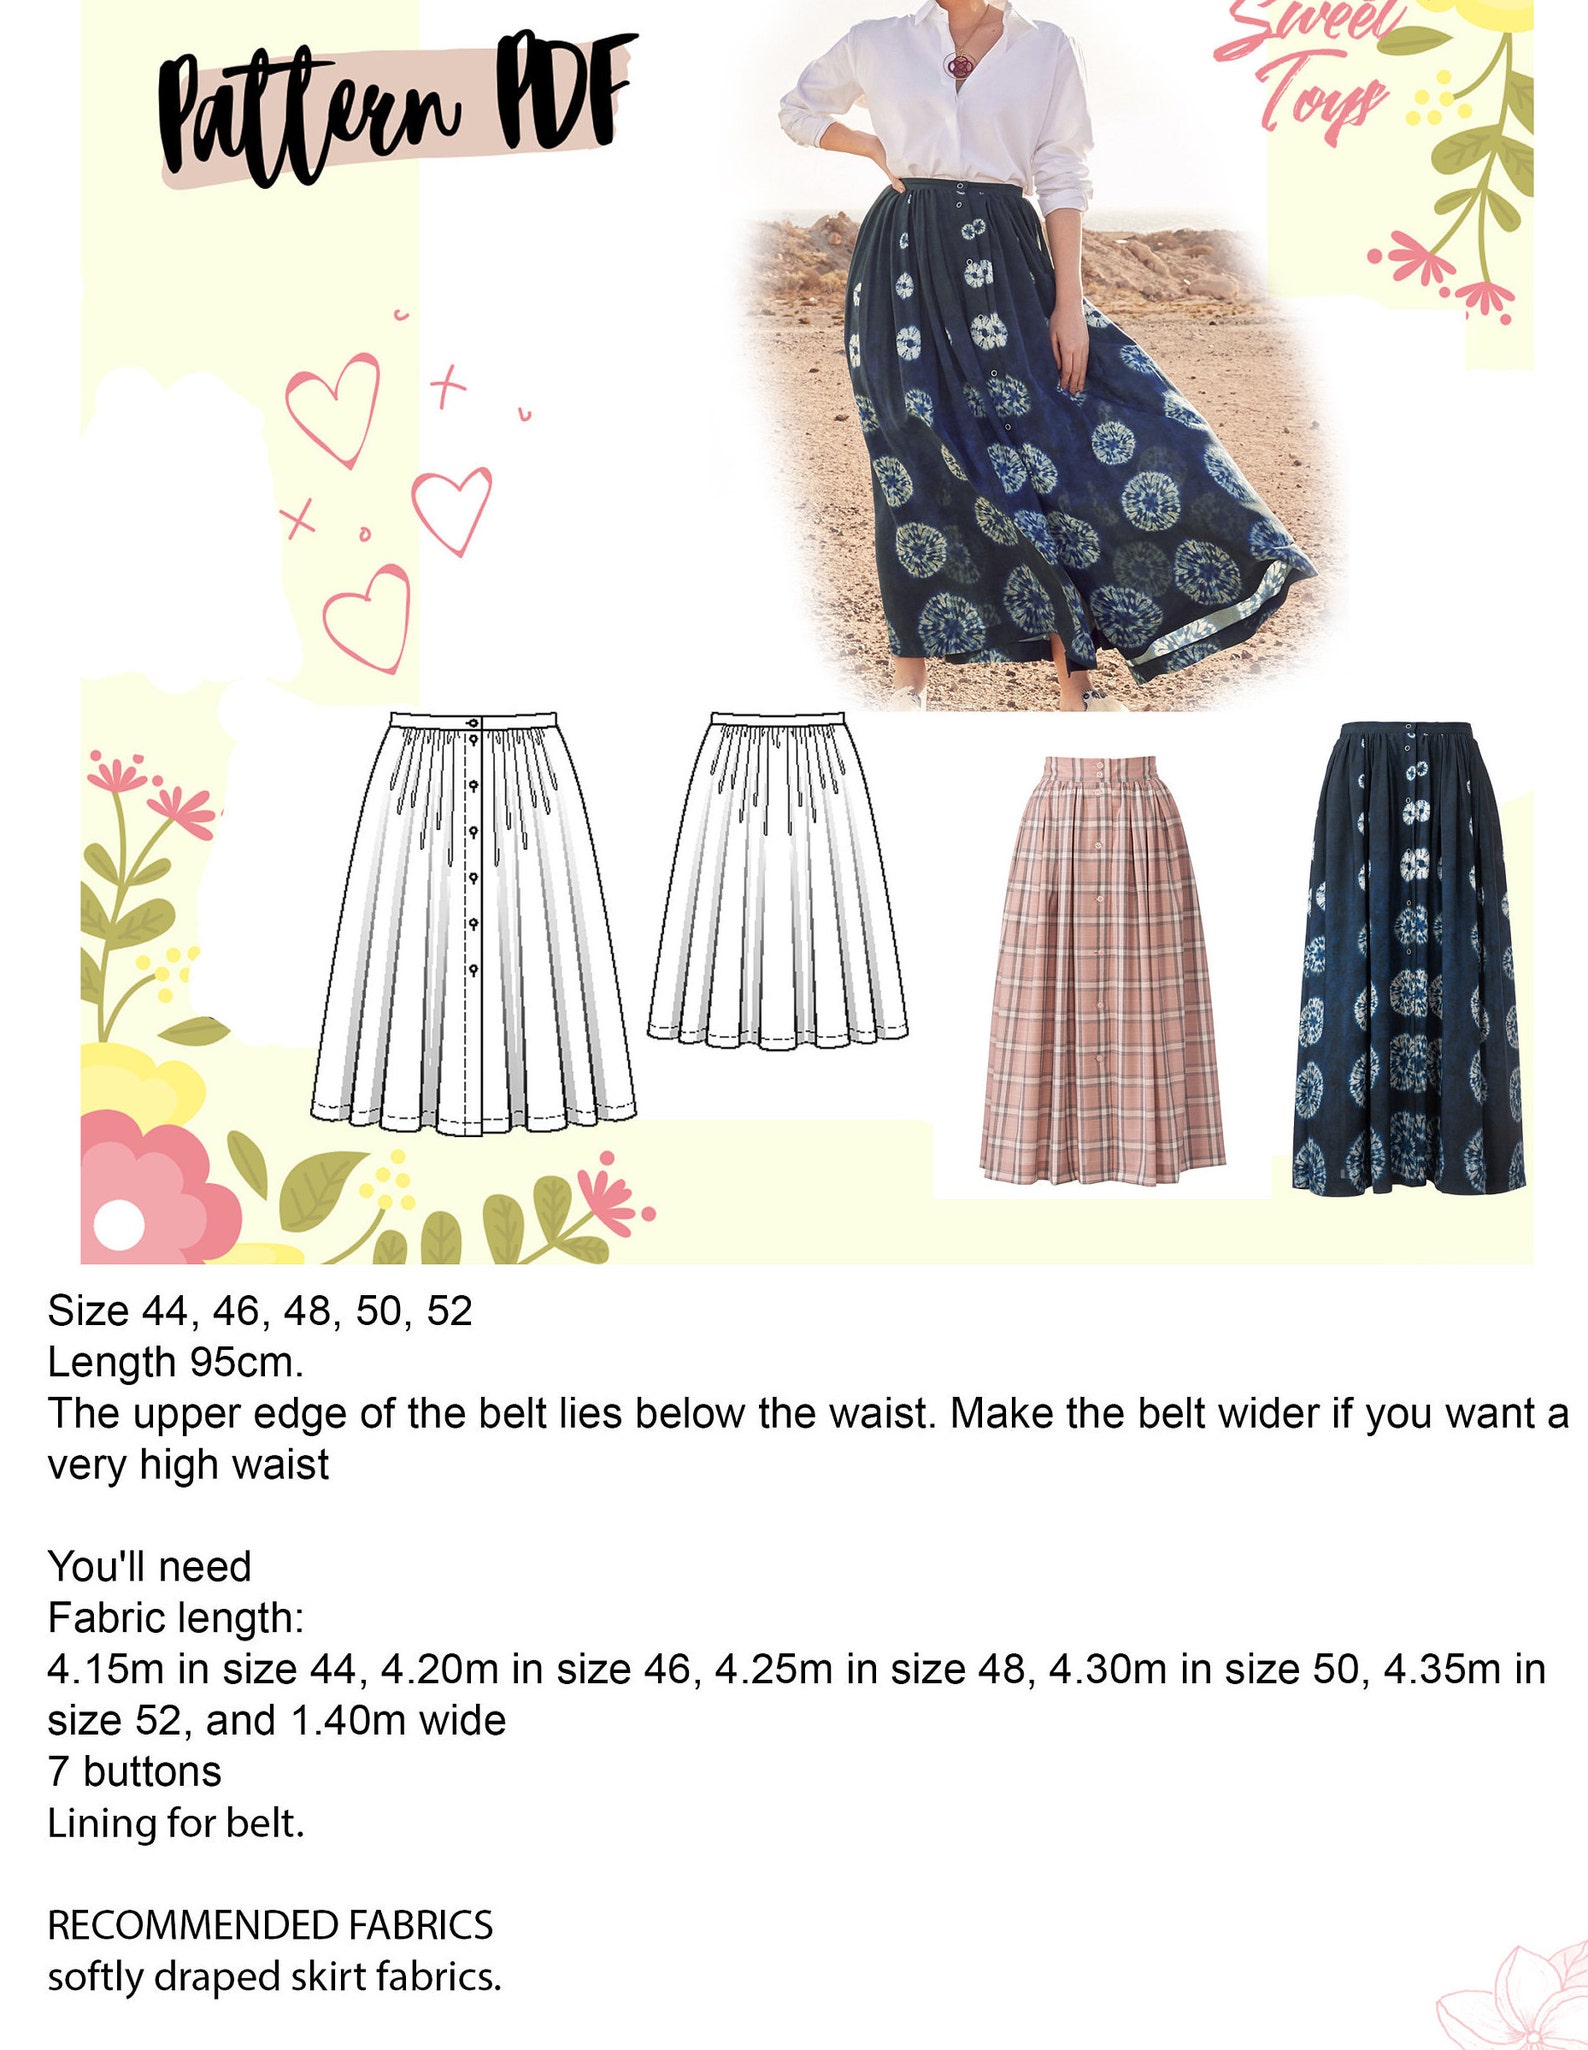 Fluffy skirt for women big size EUR 44-52 / sewing pattern | Etsy